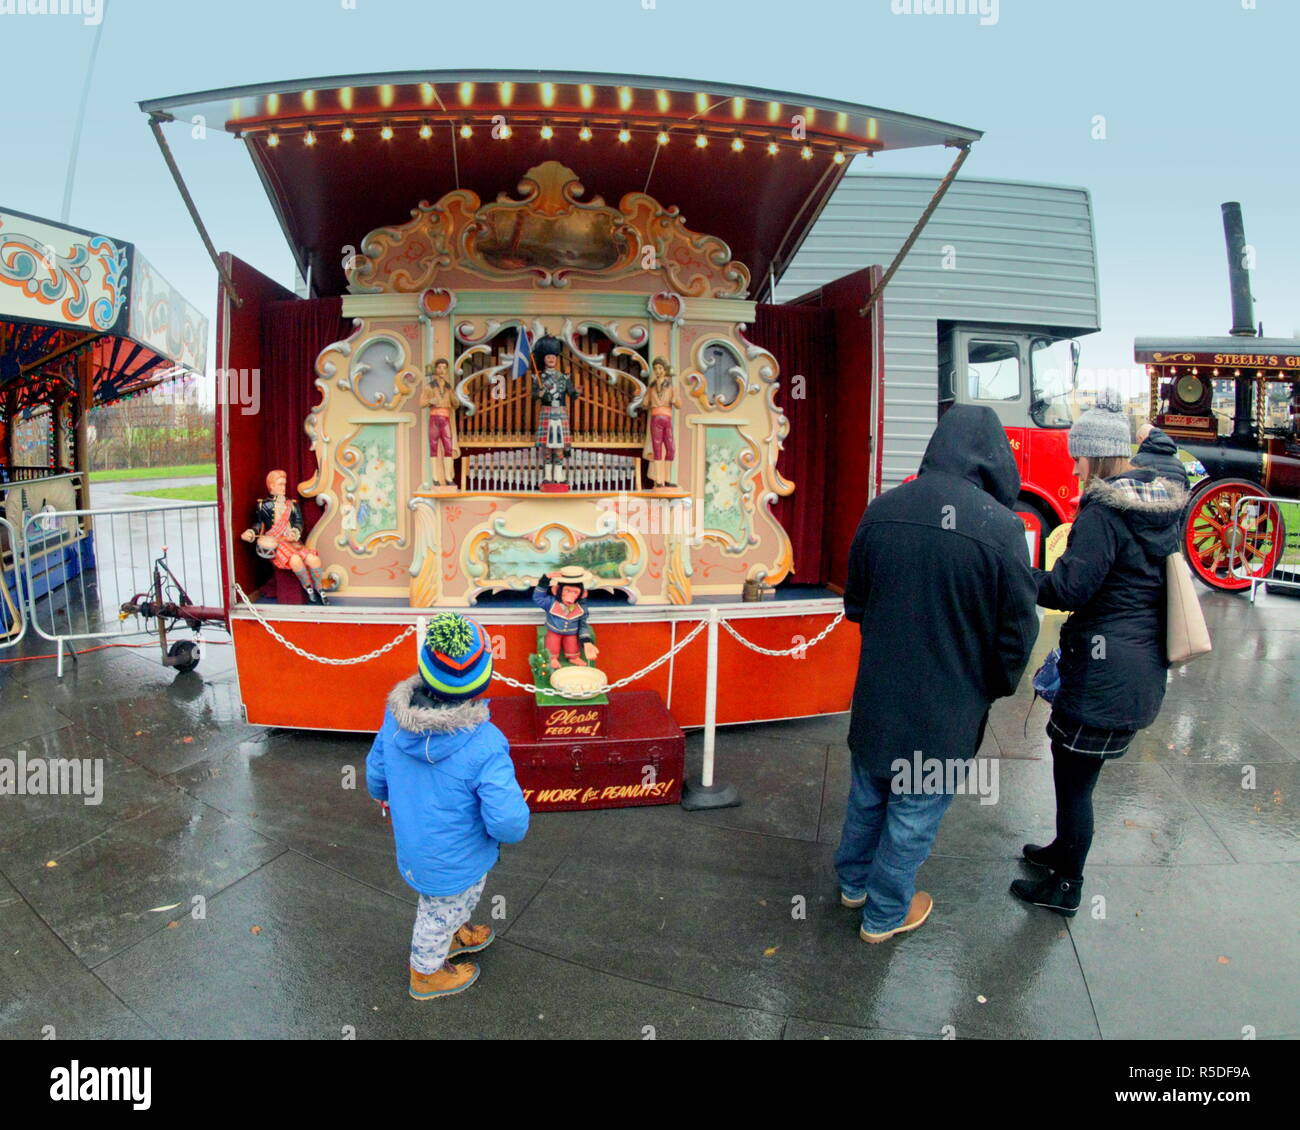 Glasgow, Scotland, UK 1st December, 2018. The annual Riverside Christmas Festival in the  famous city Riverside  transport museum today as well as its markets inside and fairground attractions outside had a fairground organ is a pipe organ.  Gerard Ferry/Alamy news Credit: gerard ferry/Alamy Live News Stock Photo